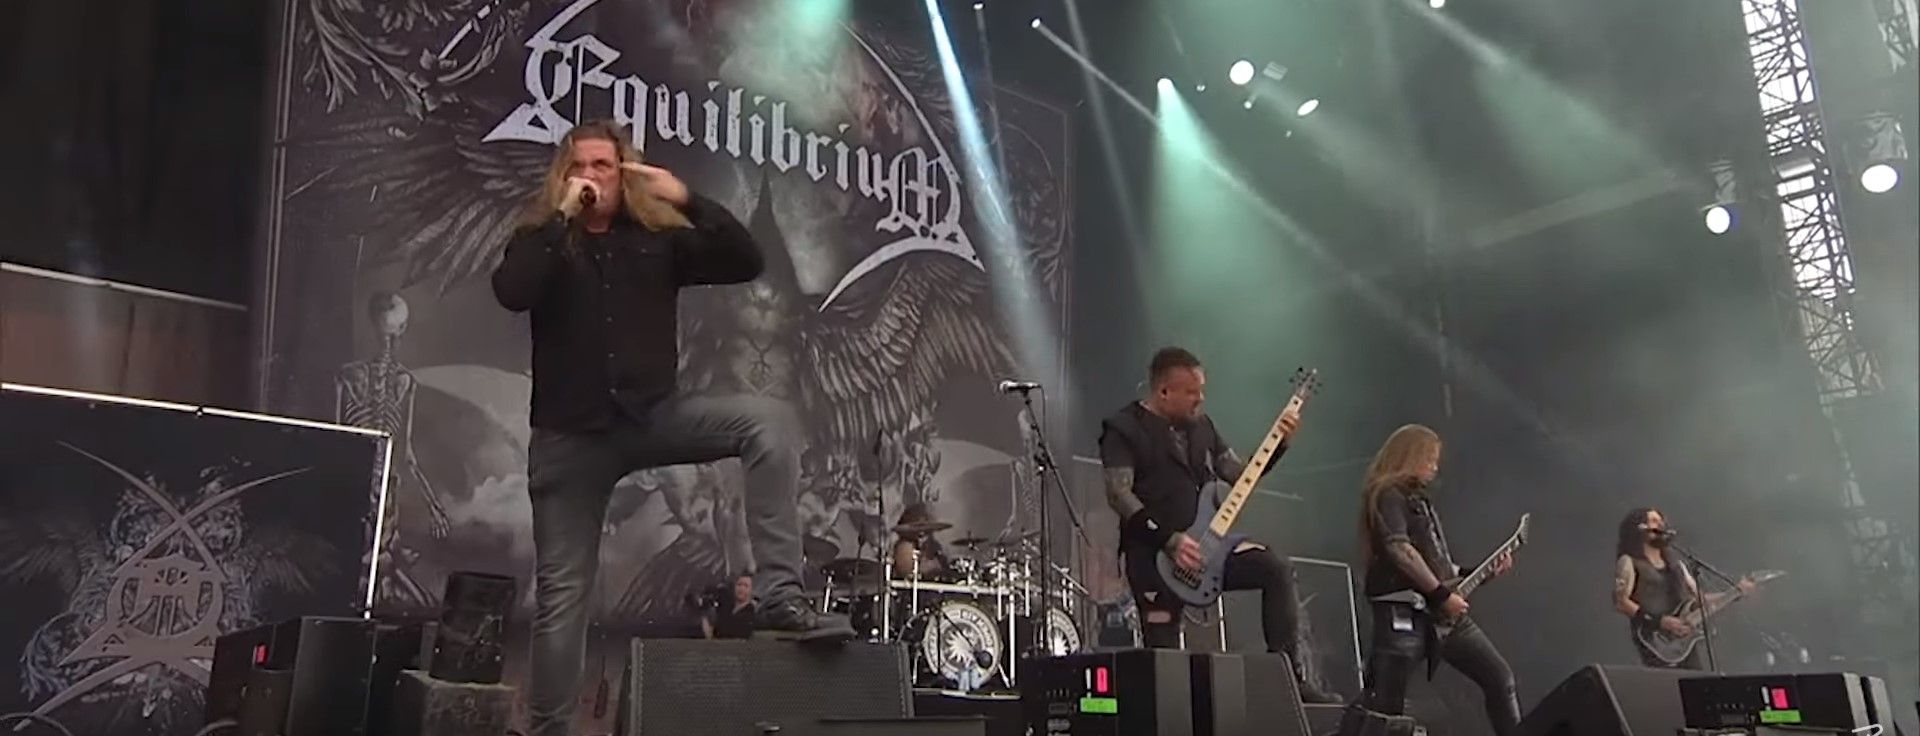 Equilibrium - Born To Be Epic (Live At Rockpalast 2019)